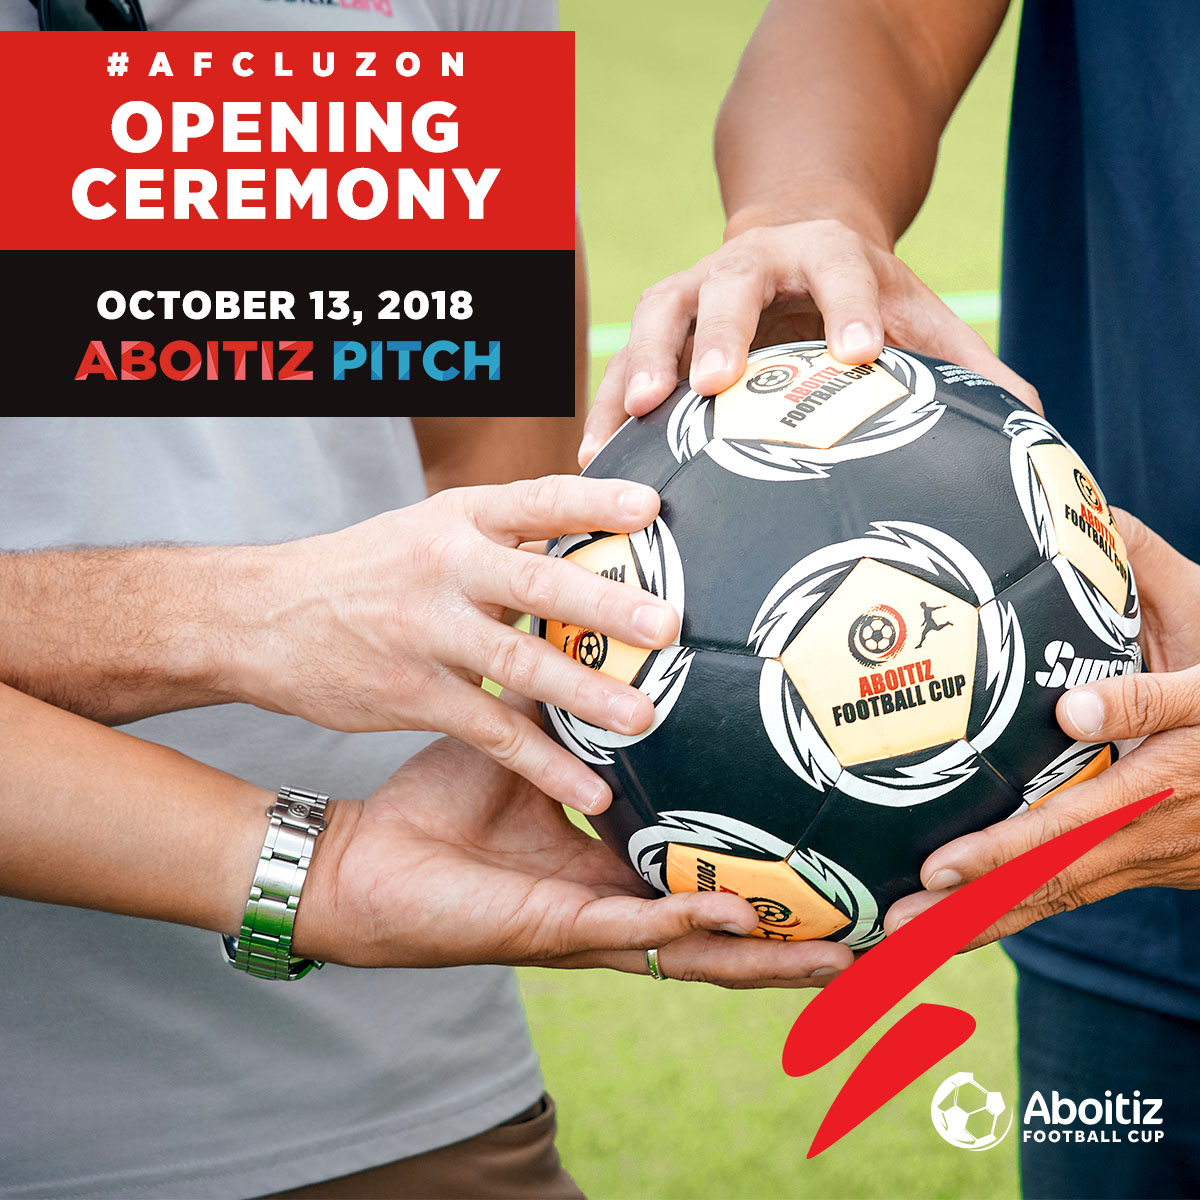 The Aboitiz Football Cup – Luzon Set to Open on October 13 at The Aboitiz Pitch of The Outlets at Lipa